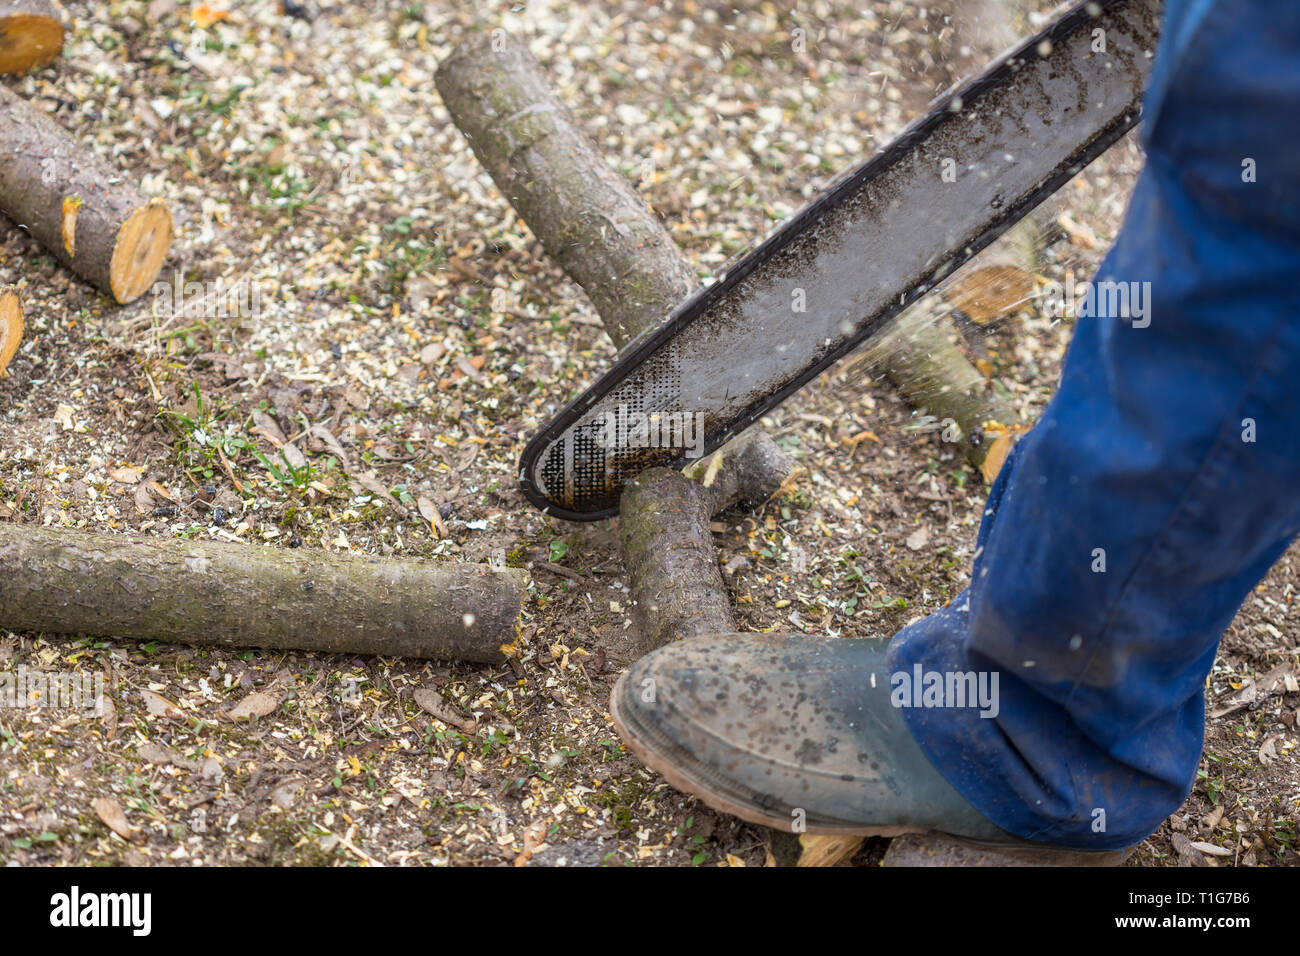 Old Man In Blue Pants Cutting A Branch Placed On The Ground